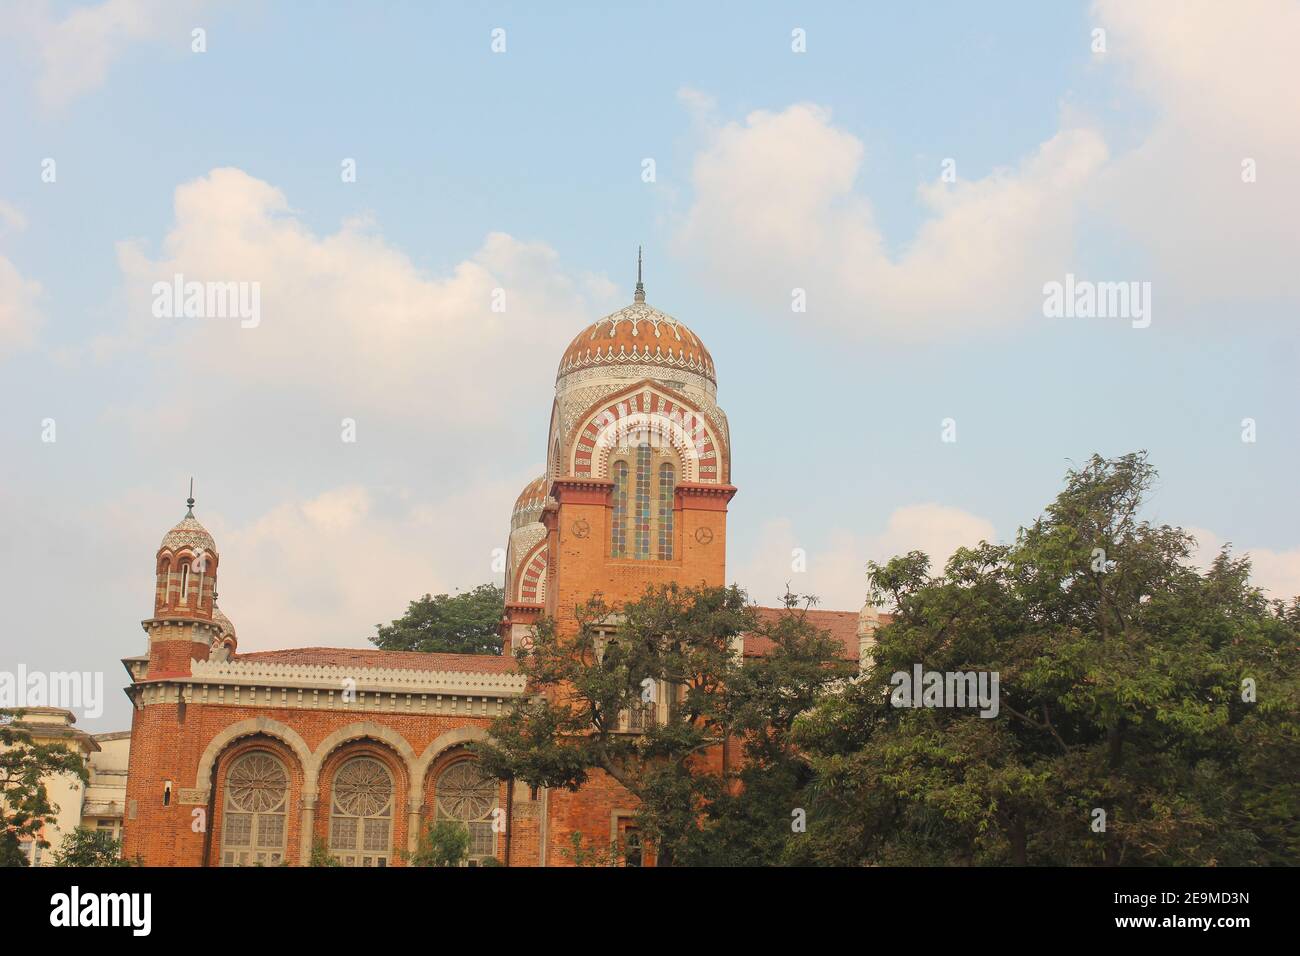 Colonial building of the University of Madras in Chennai, Tamil Nadu, India Stock Photo